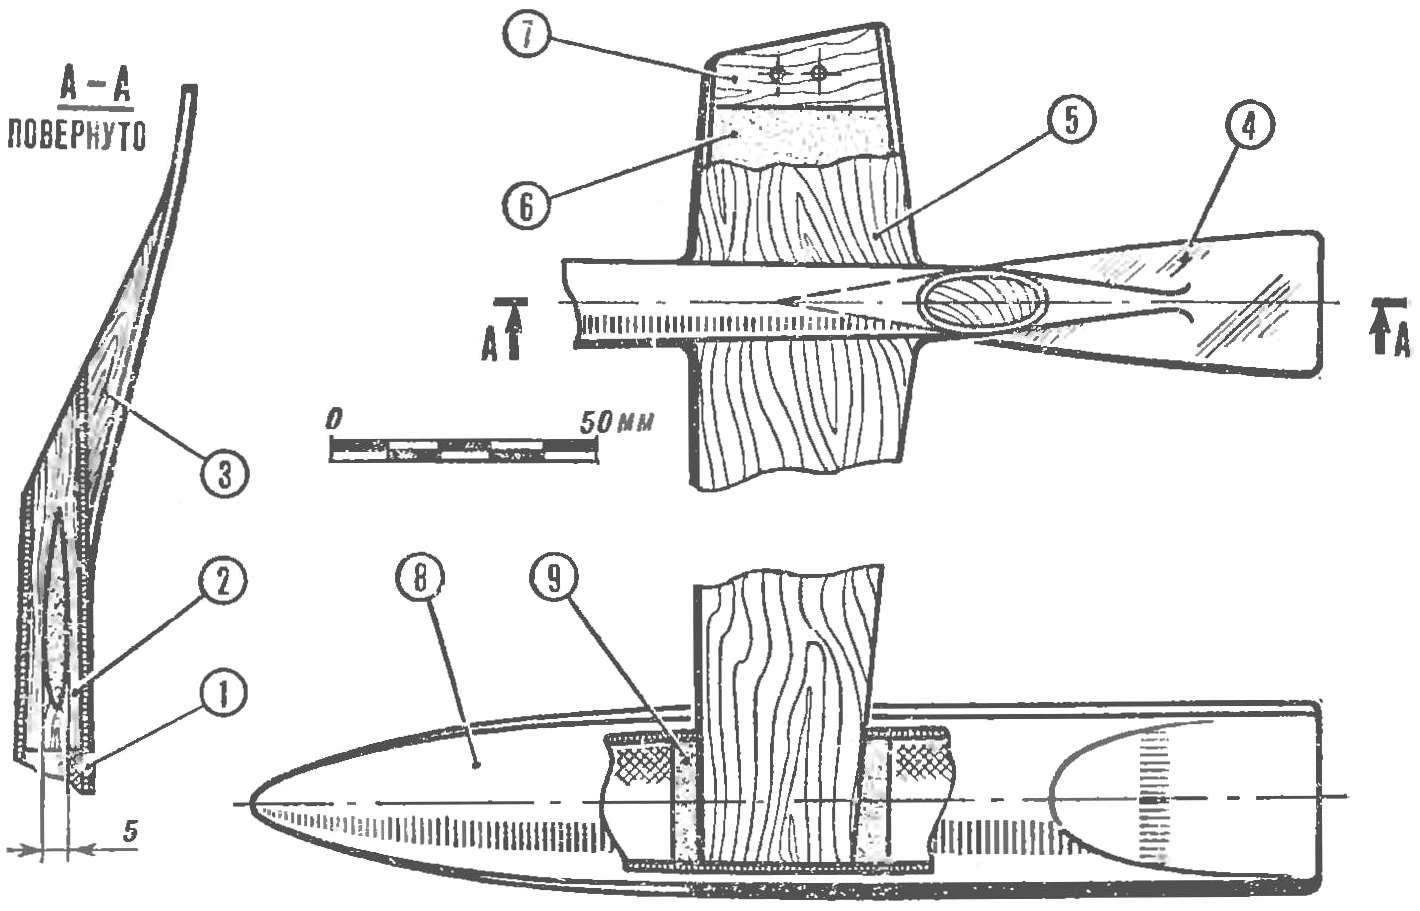 Fig. 4. The design of the aft model